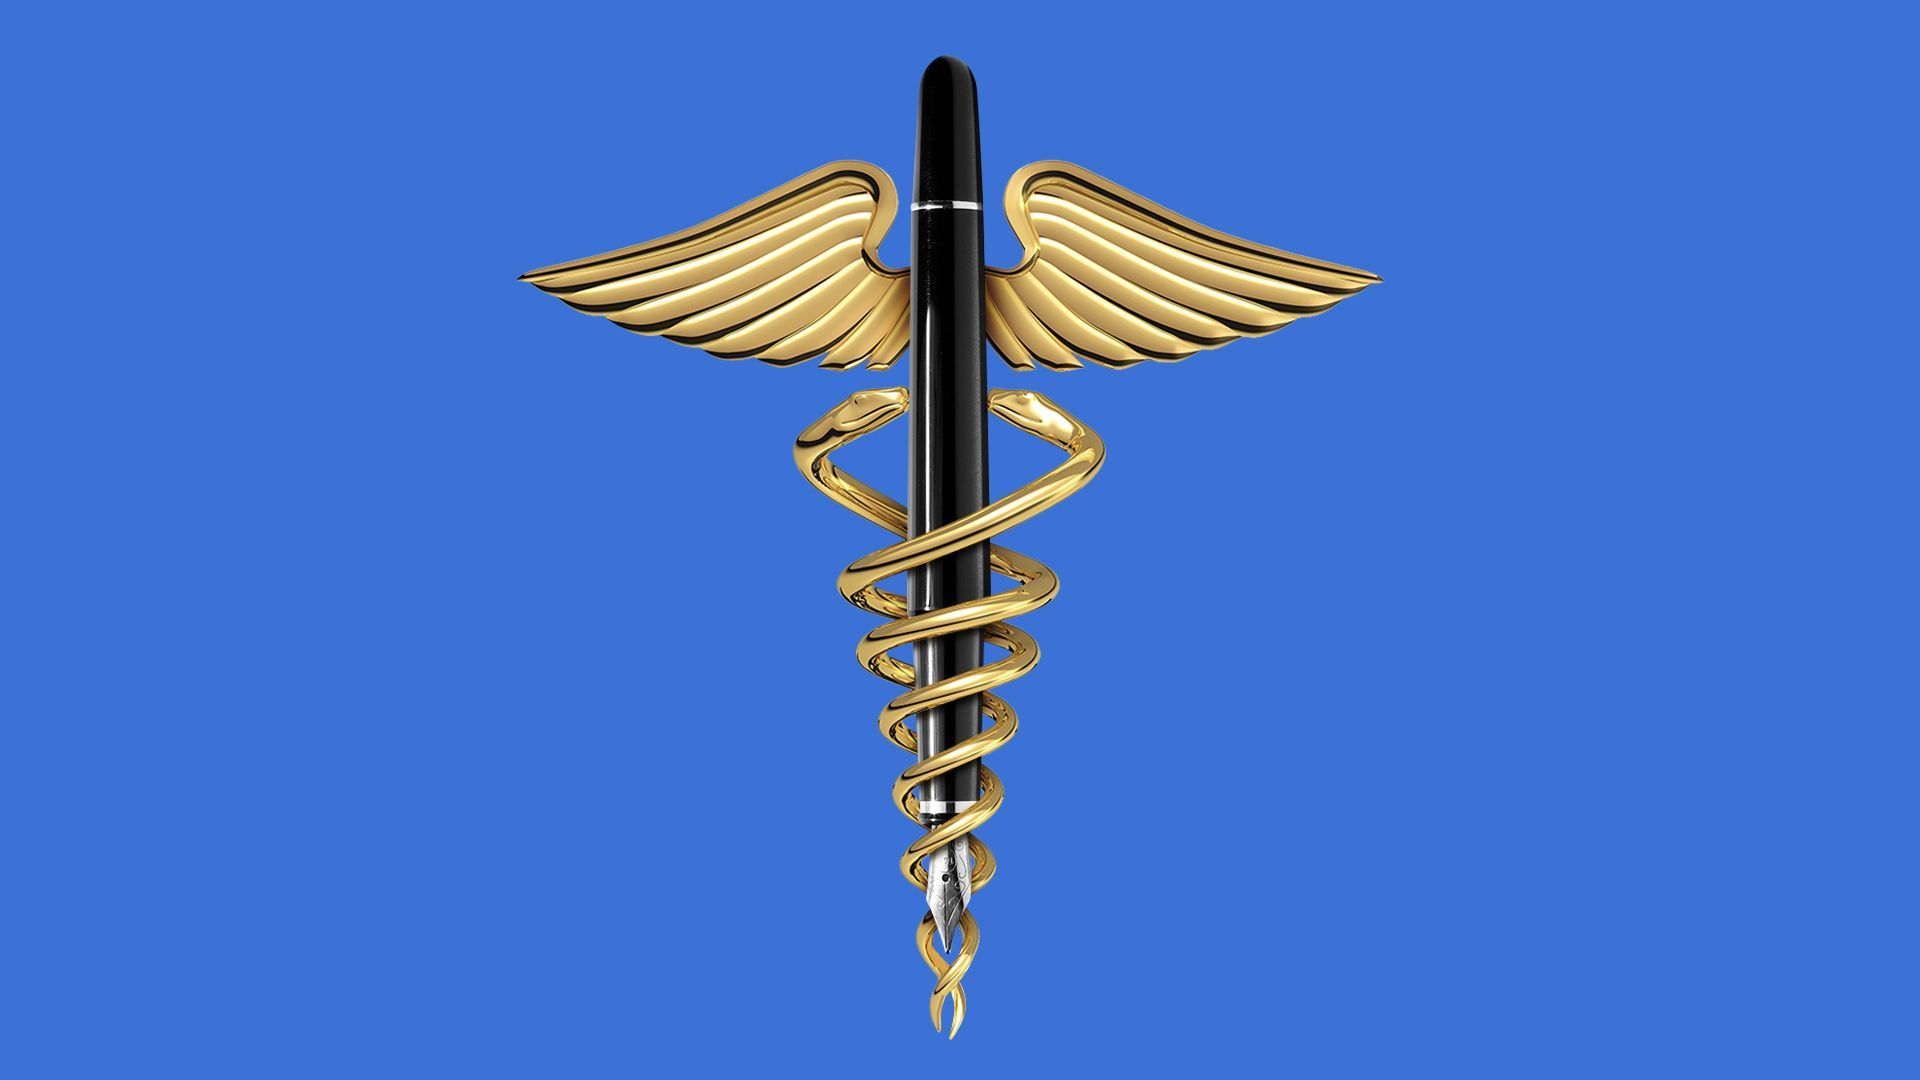 Illustration of a gold caduceus wrapped around an ink pen